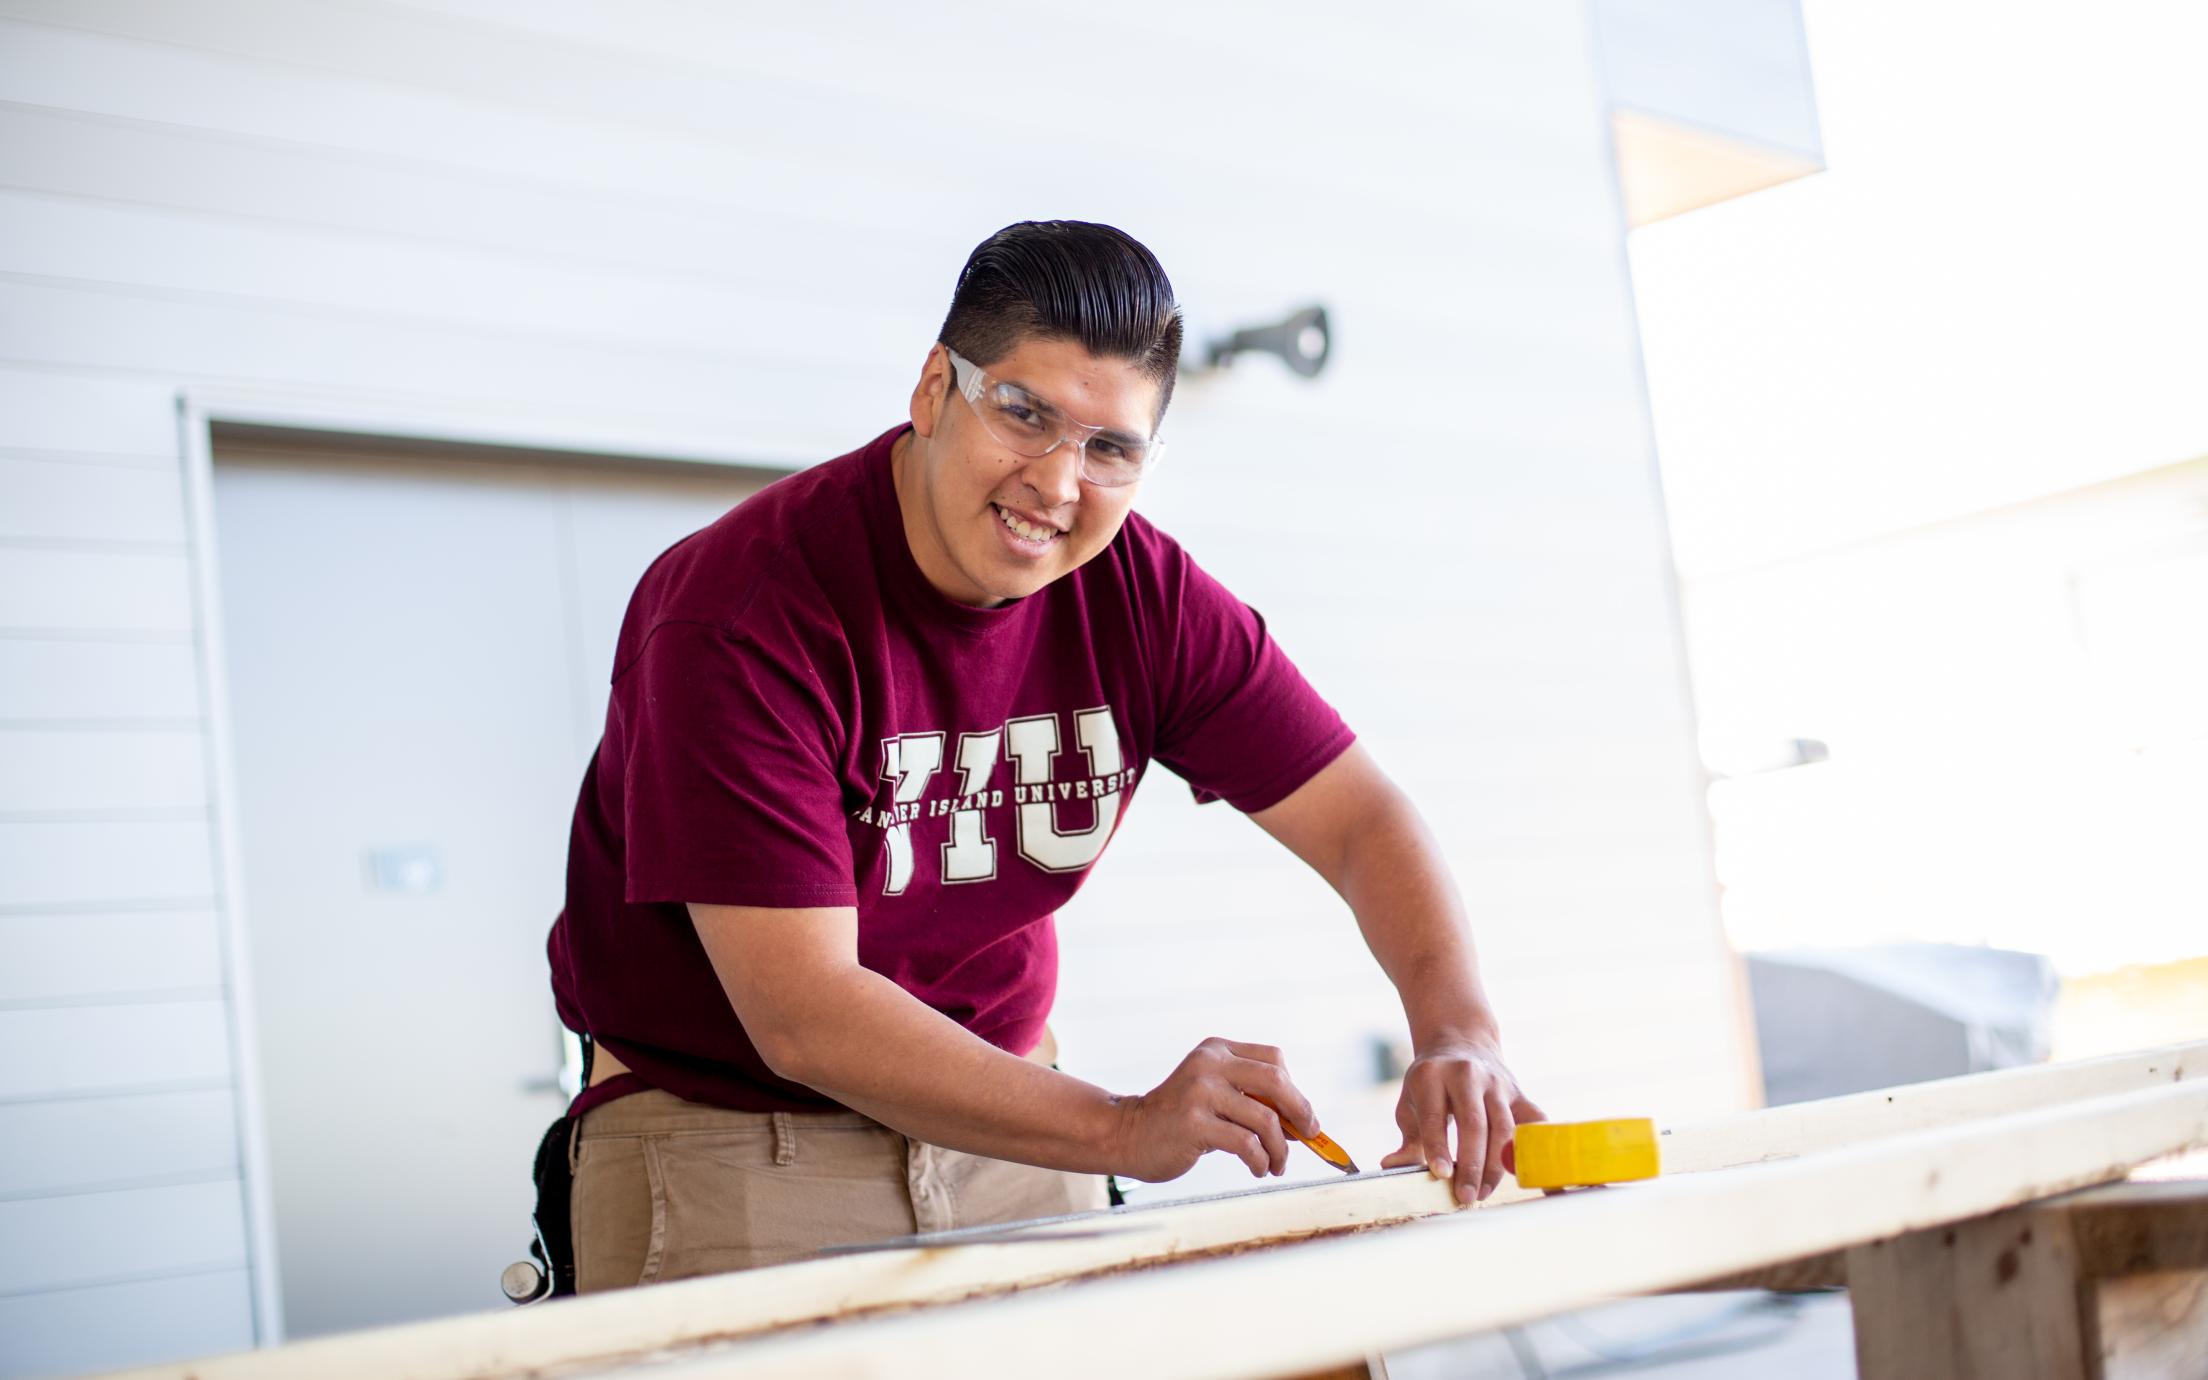 Indigenous man in red VIU shirt measuring a piece of wood in carpentry class, smiling